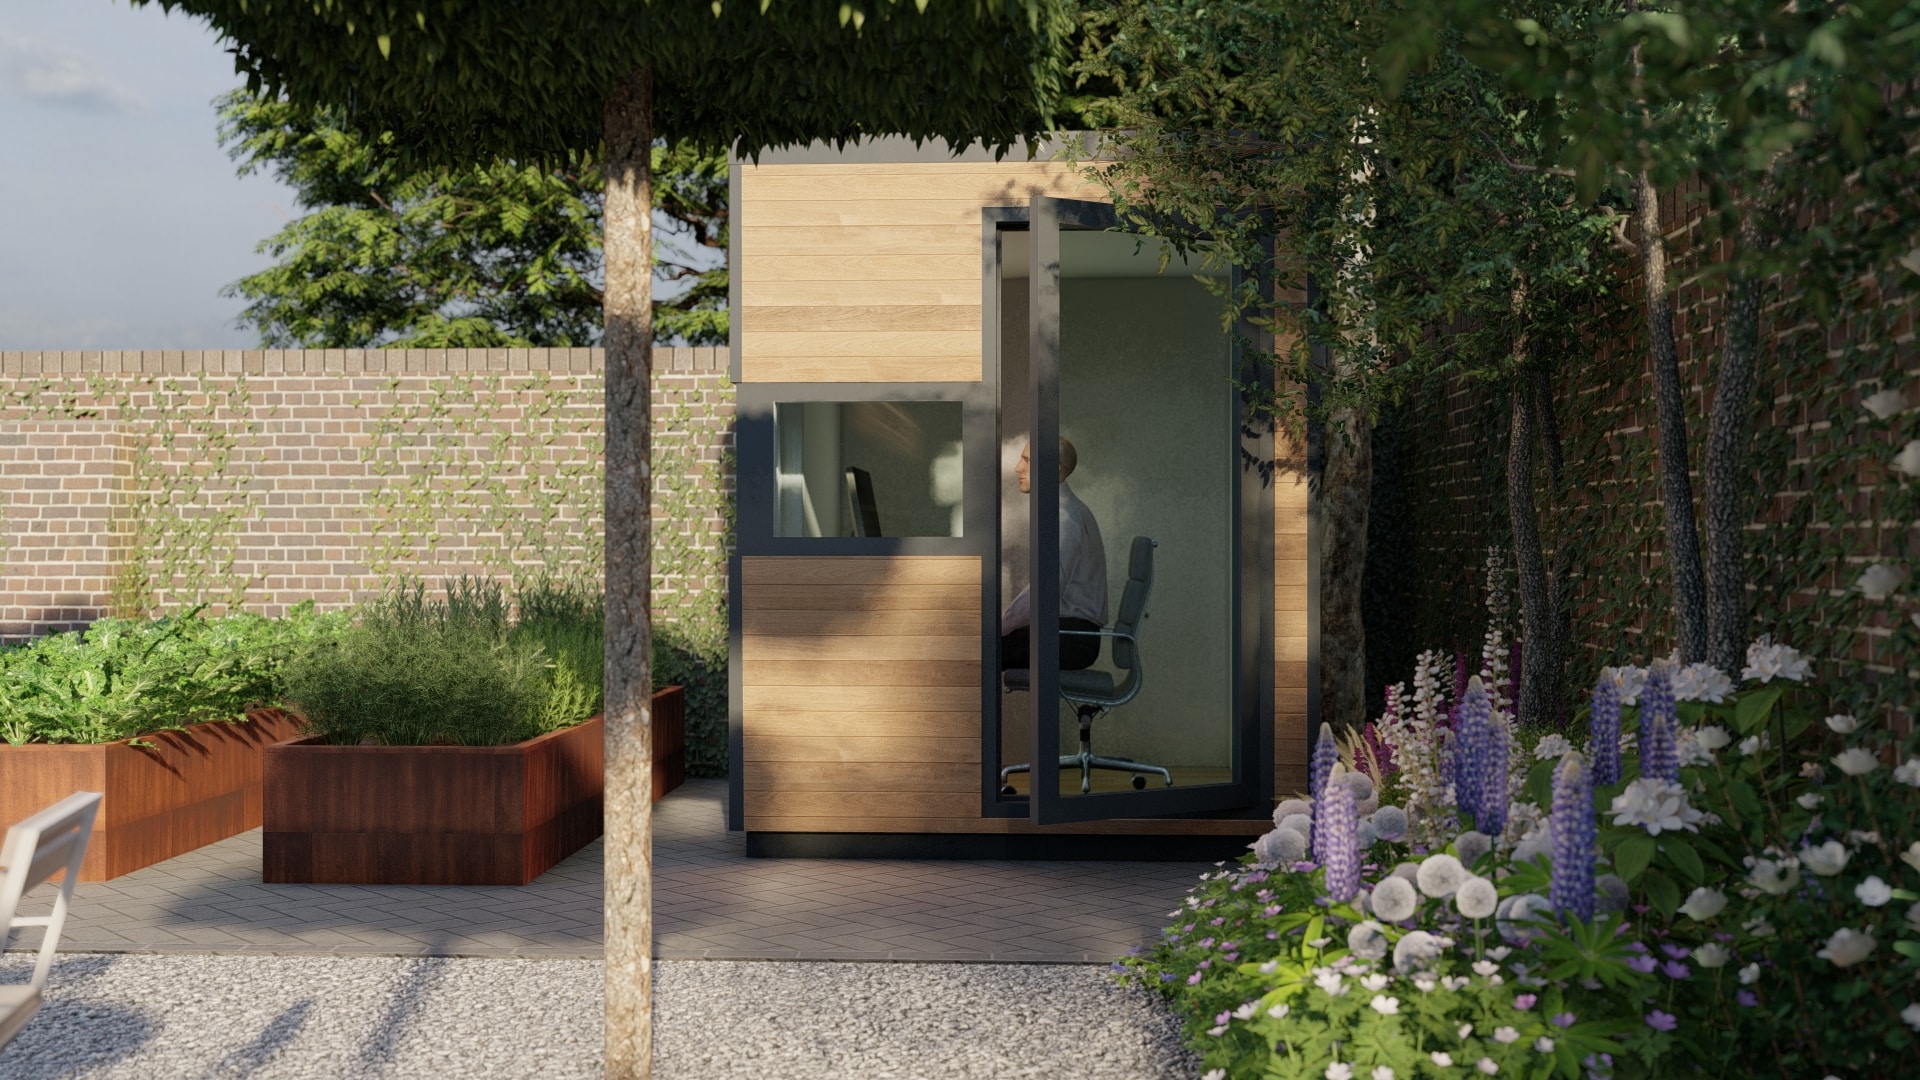 Brand new ‘eDEN Hub’ home office to revolutionise working-from-home